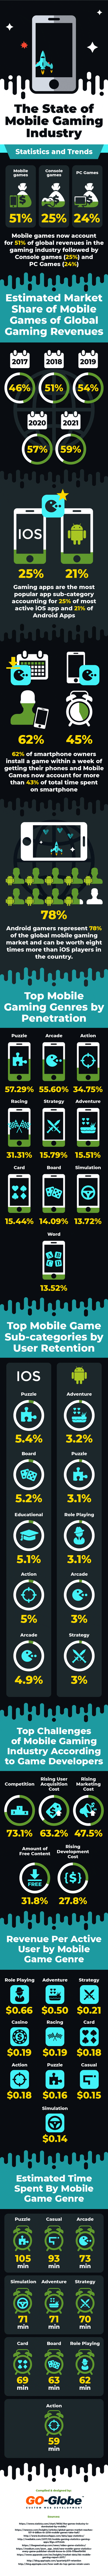 The State of Mobile Gaming Industry - Statistics and Trends